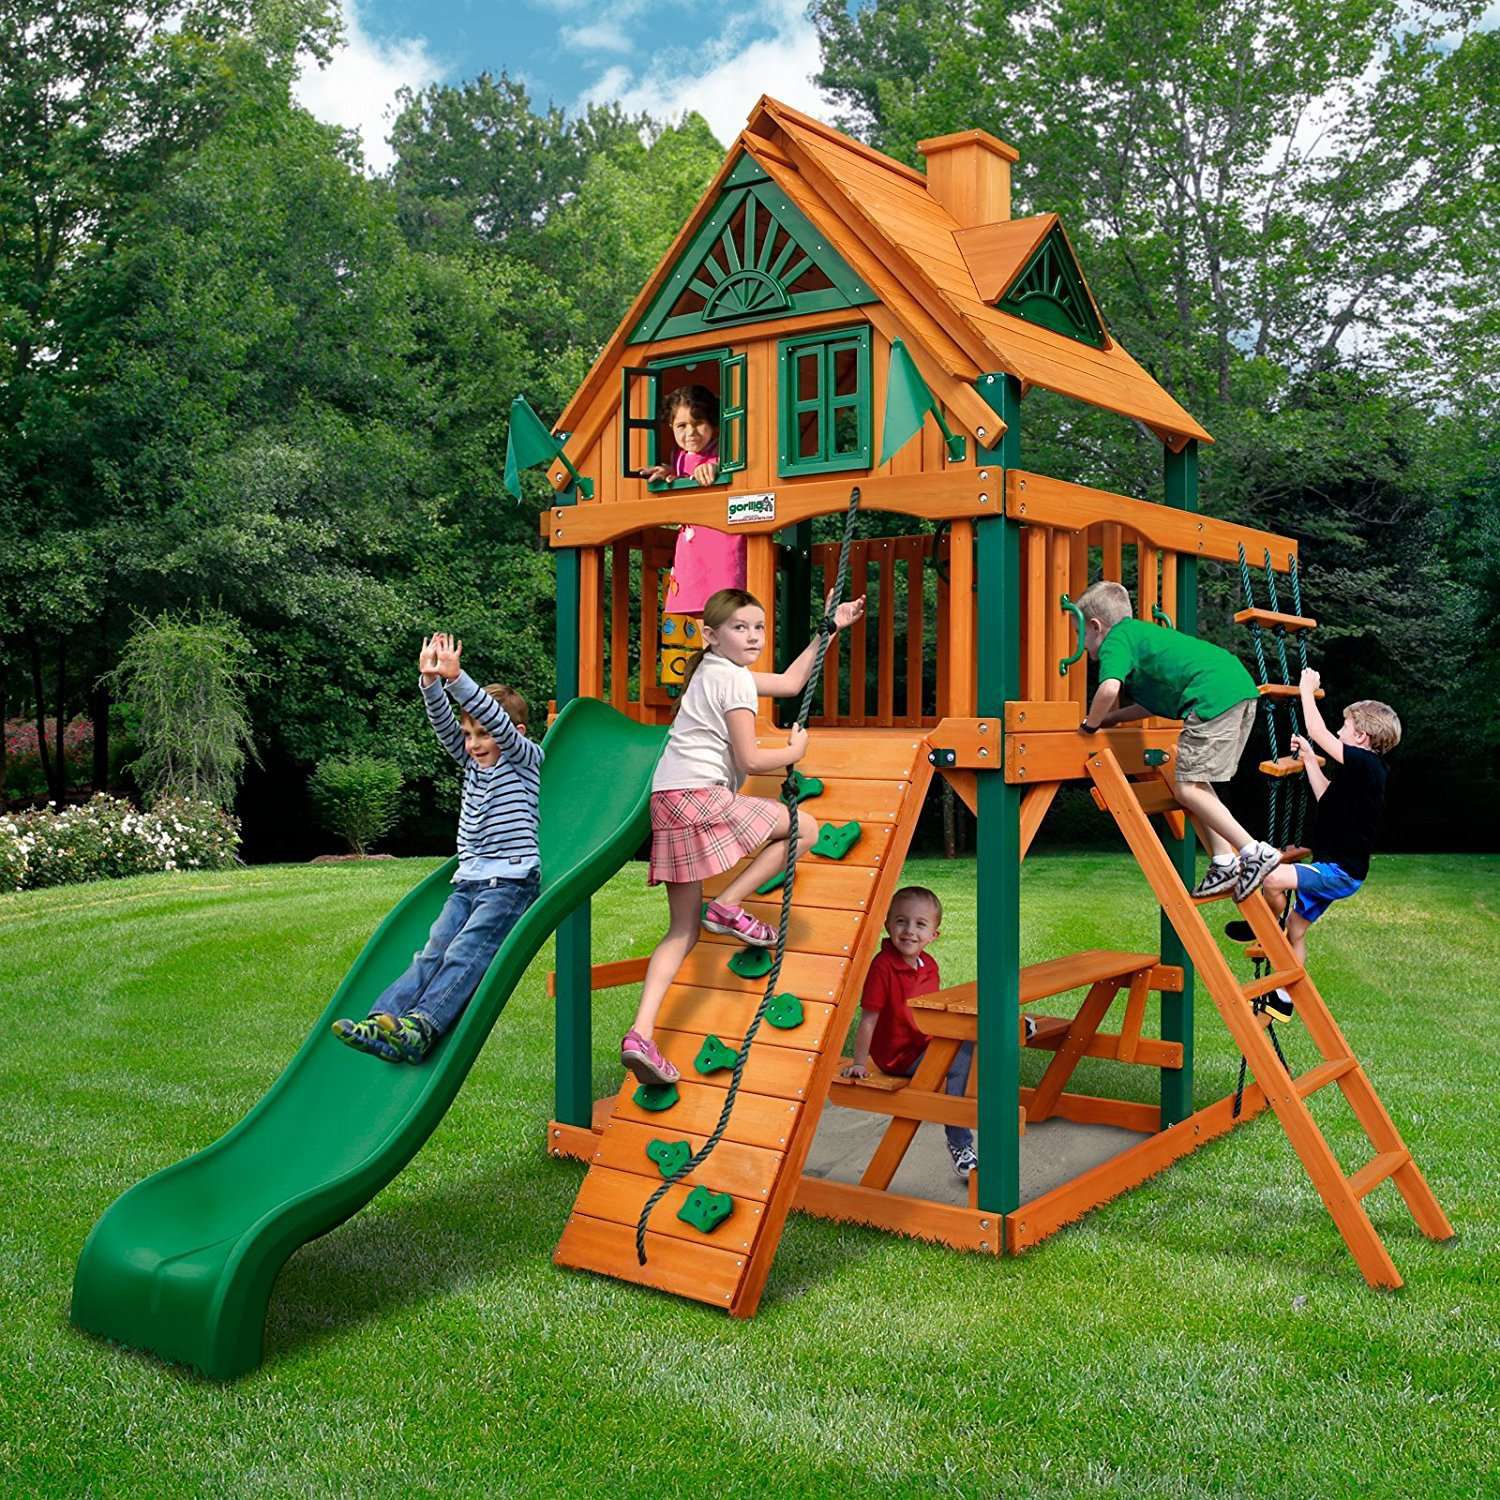 The 10 Best Wooden Swing Sets And Playsets Of 2017